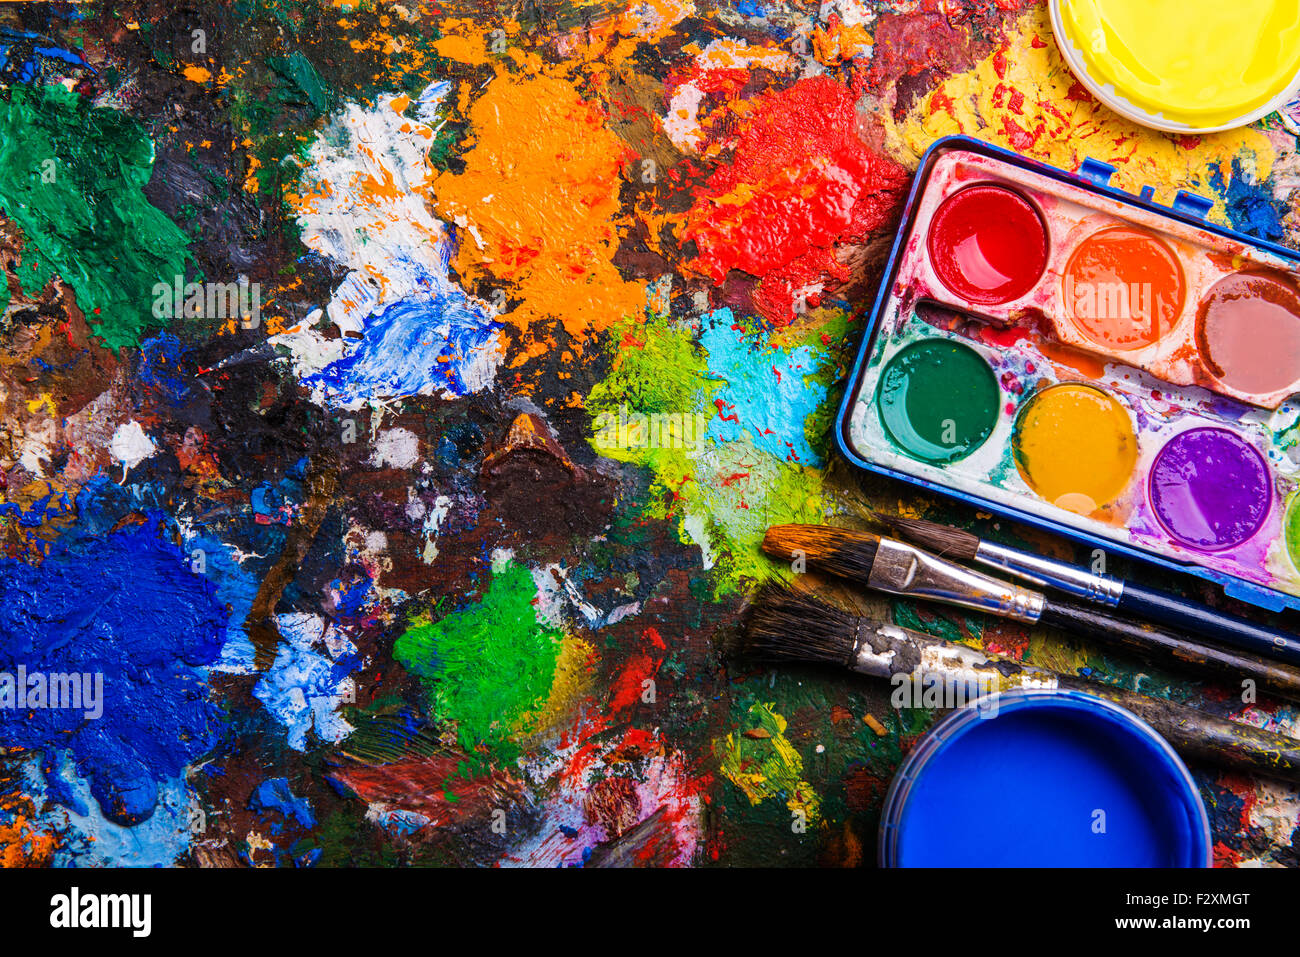 Desk of an artist with watercolor paints and paintbrushes. Stock Photo